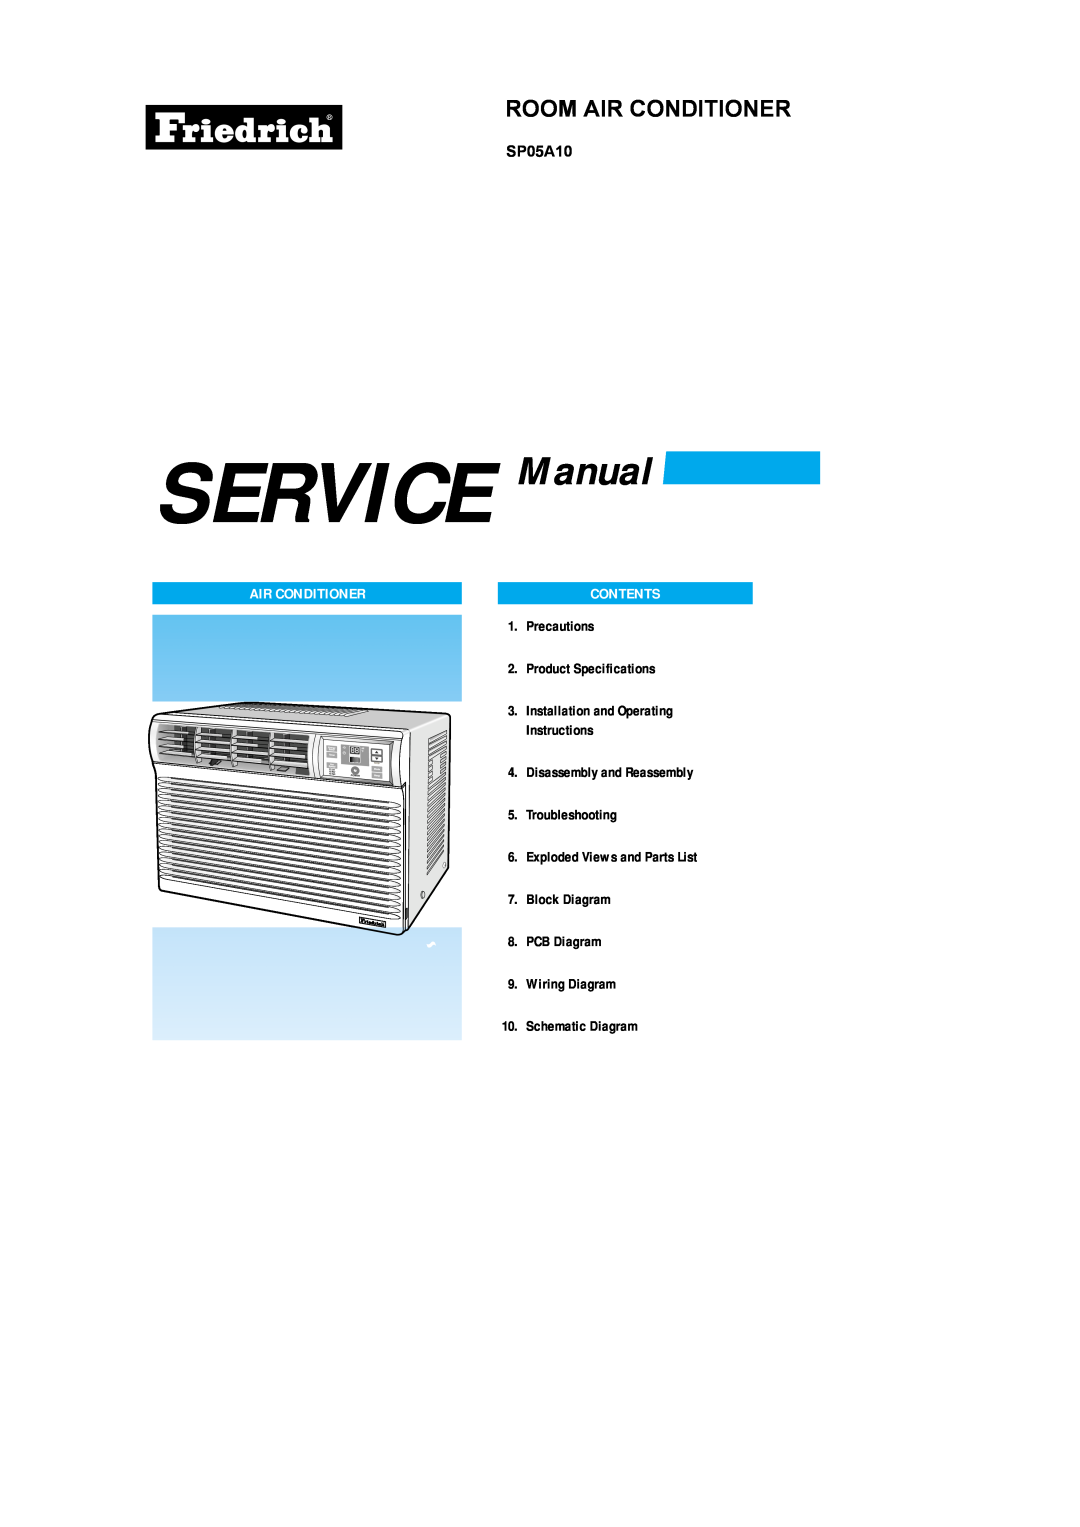 Friedrich SP05A10 service manual Room Air Conditioner, Contents 